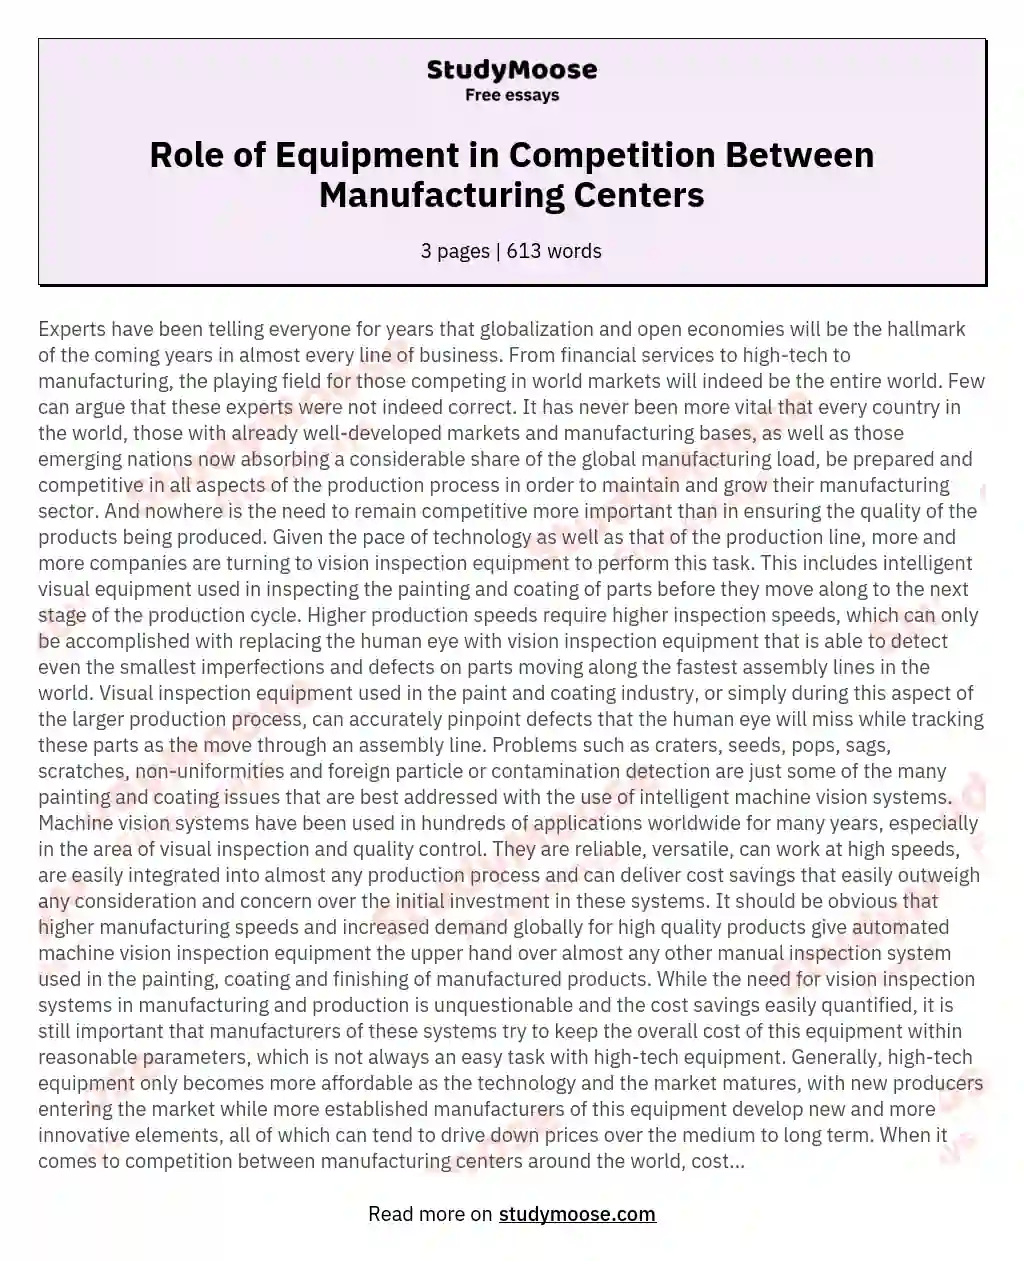 Role of Equipment in Competition Between Manufacturing Centers